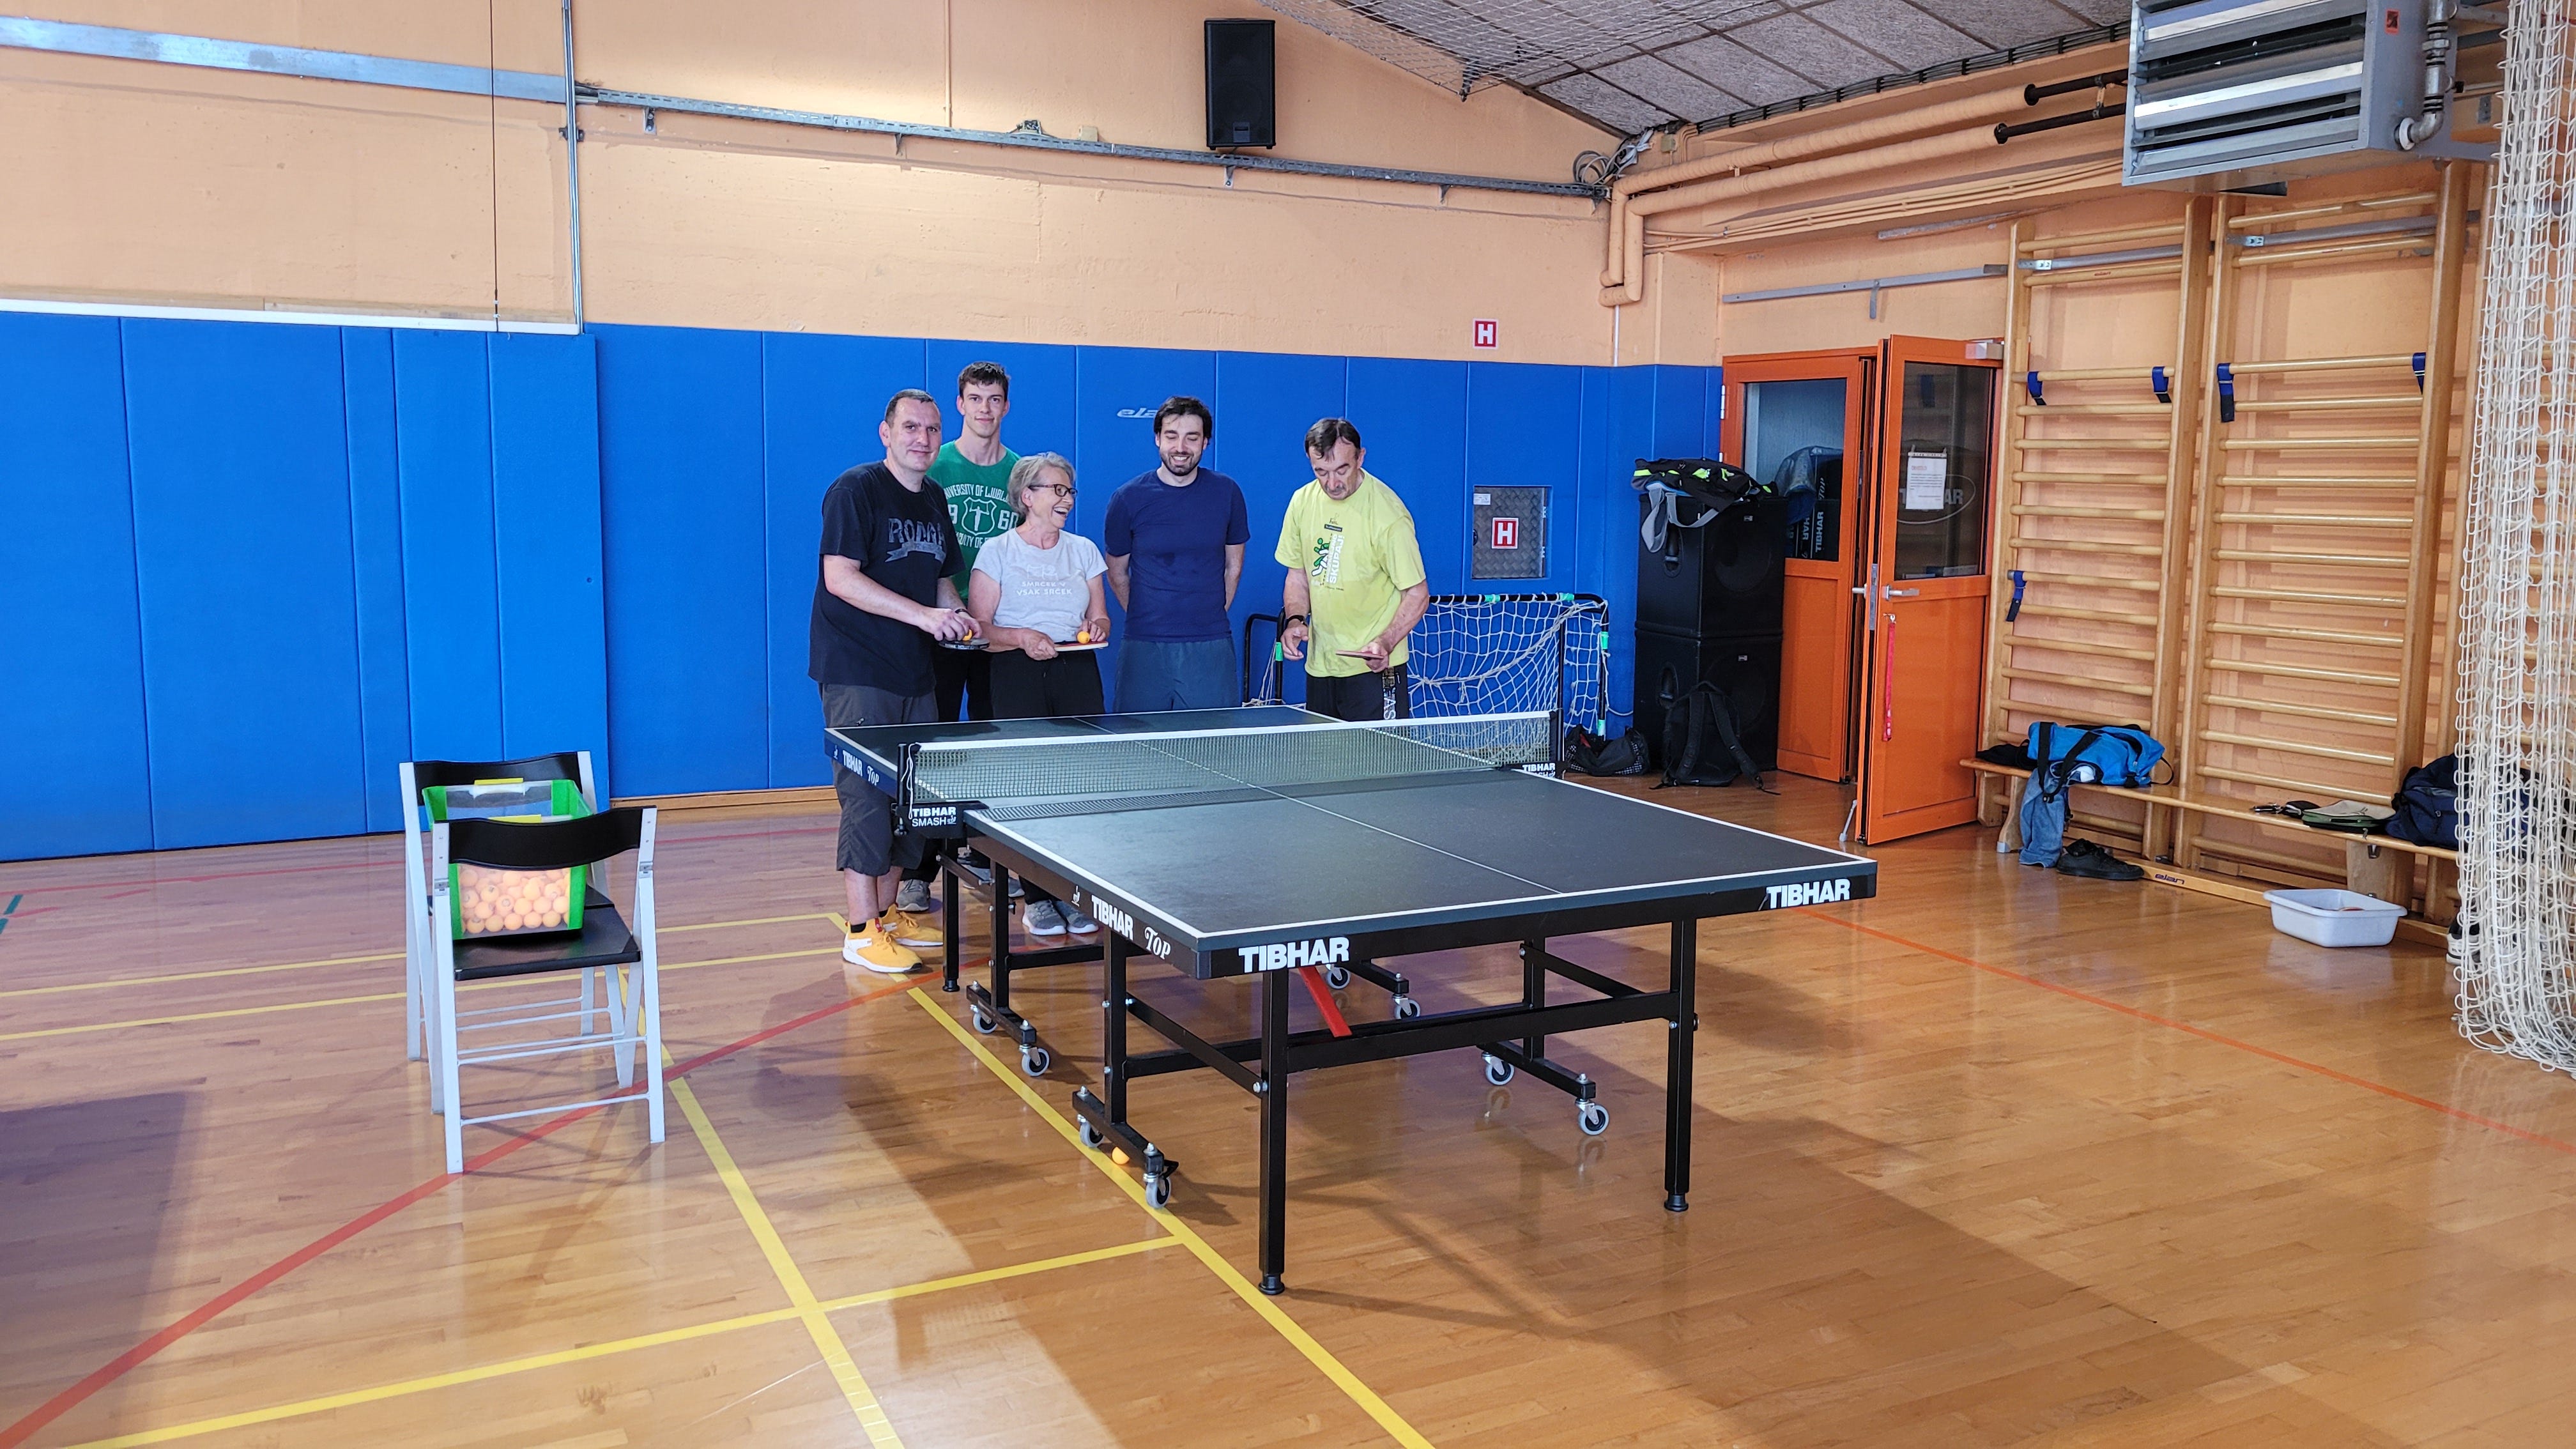 Parkinson’s table tennis group in the last practice session